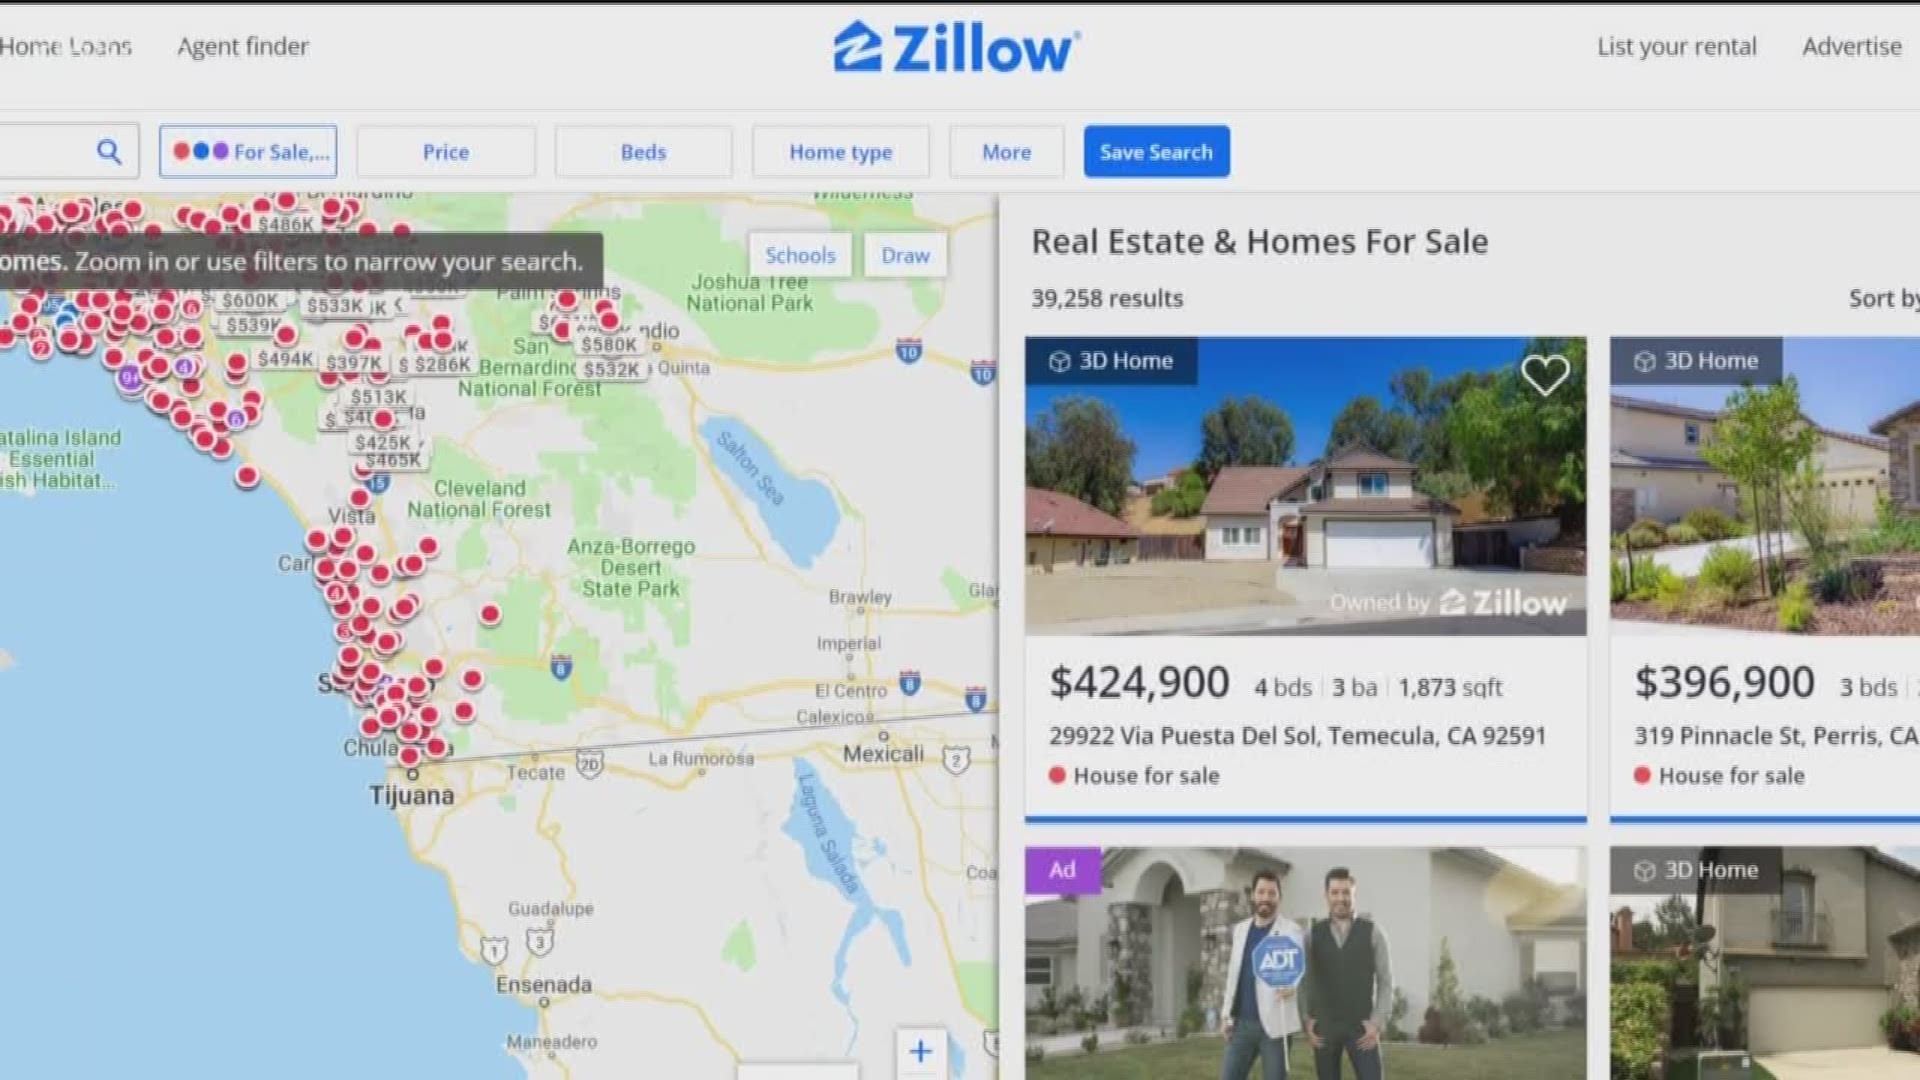 Real estate website Zillow is bringing its “Offers” feature to San Diego where the dot-com will buy your home for cash on your schedule.